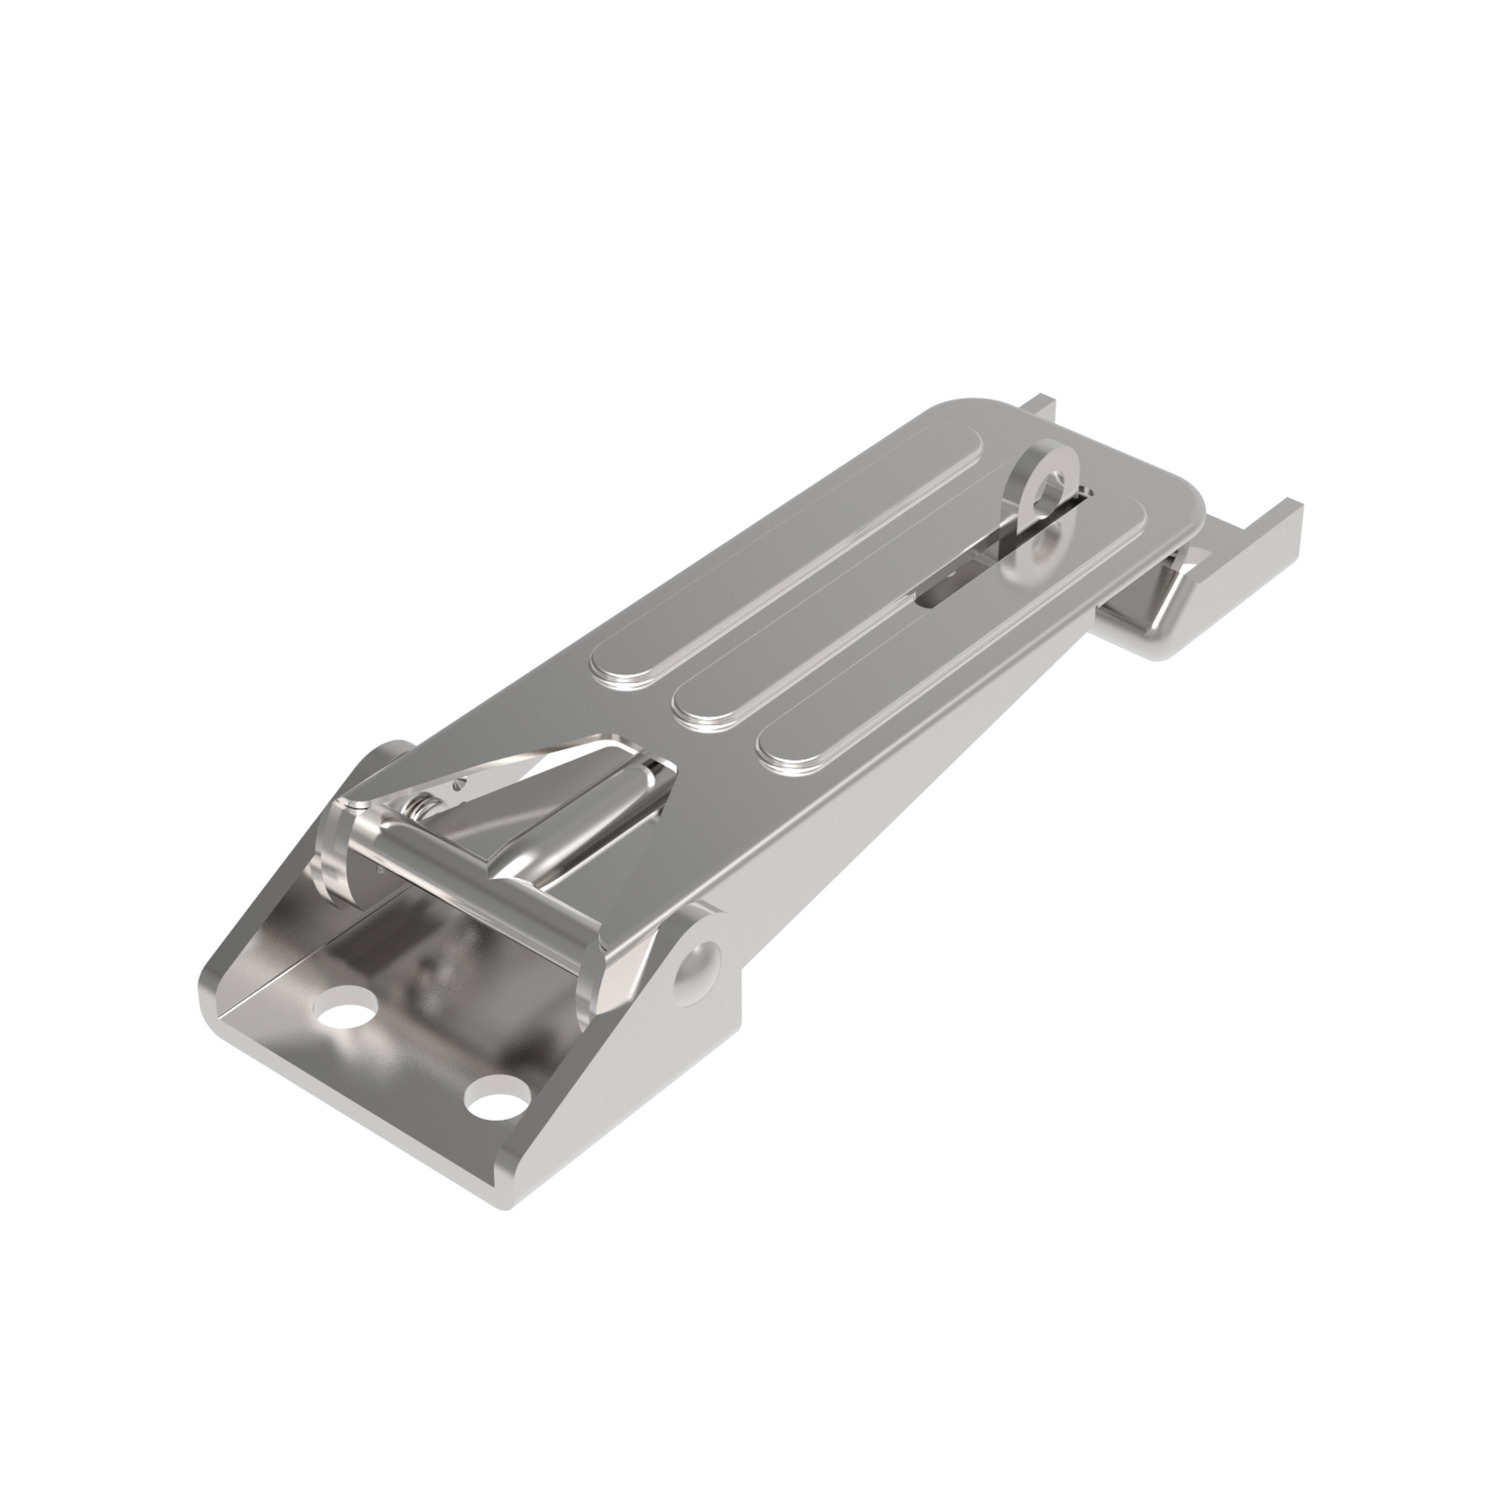 J0590.AC0008 Toggle Latches - Zinc plated steel. Zinc Plated - 135 to 150 - 23 - 45,5